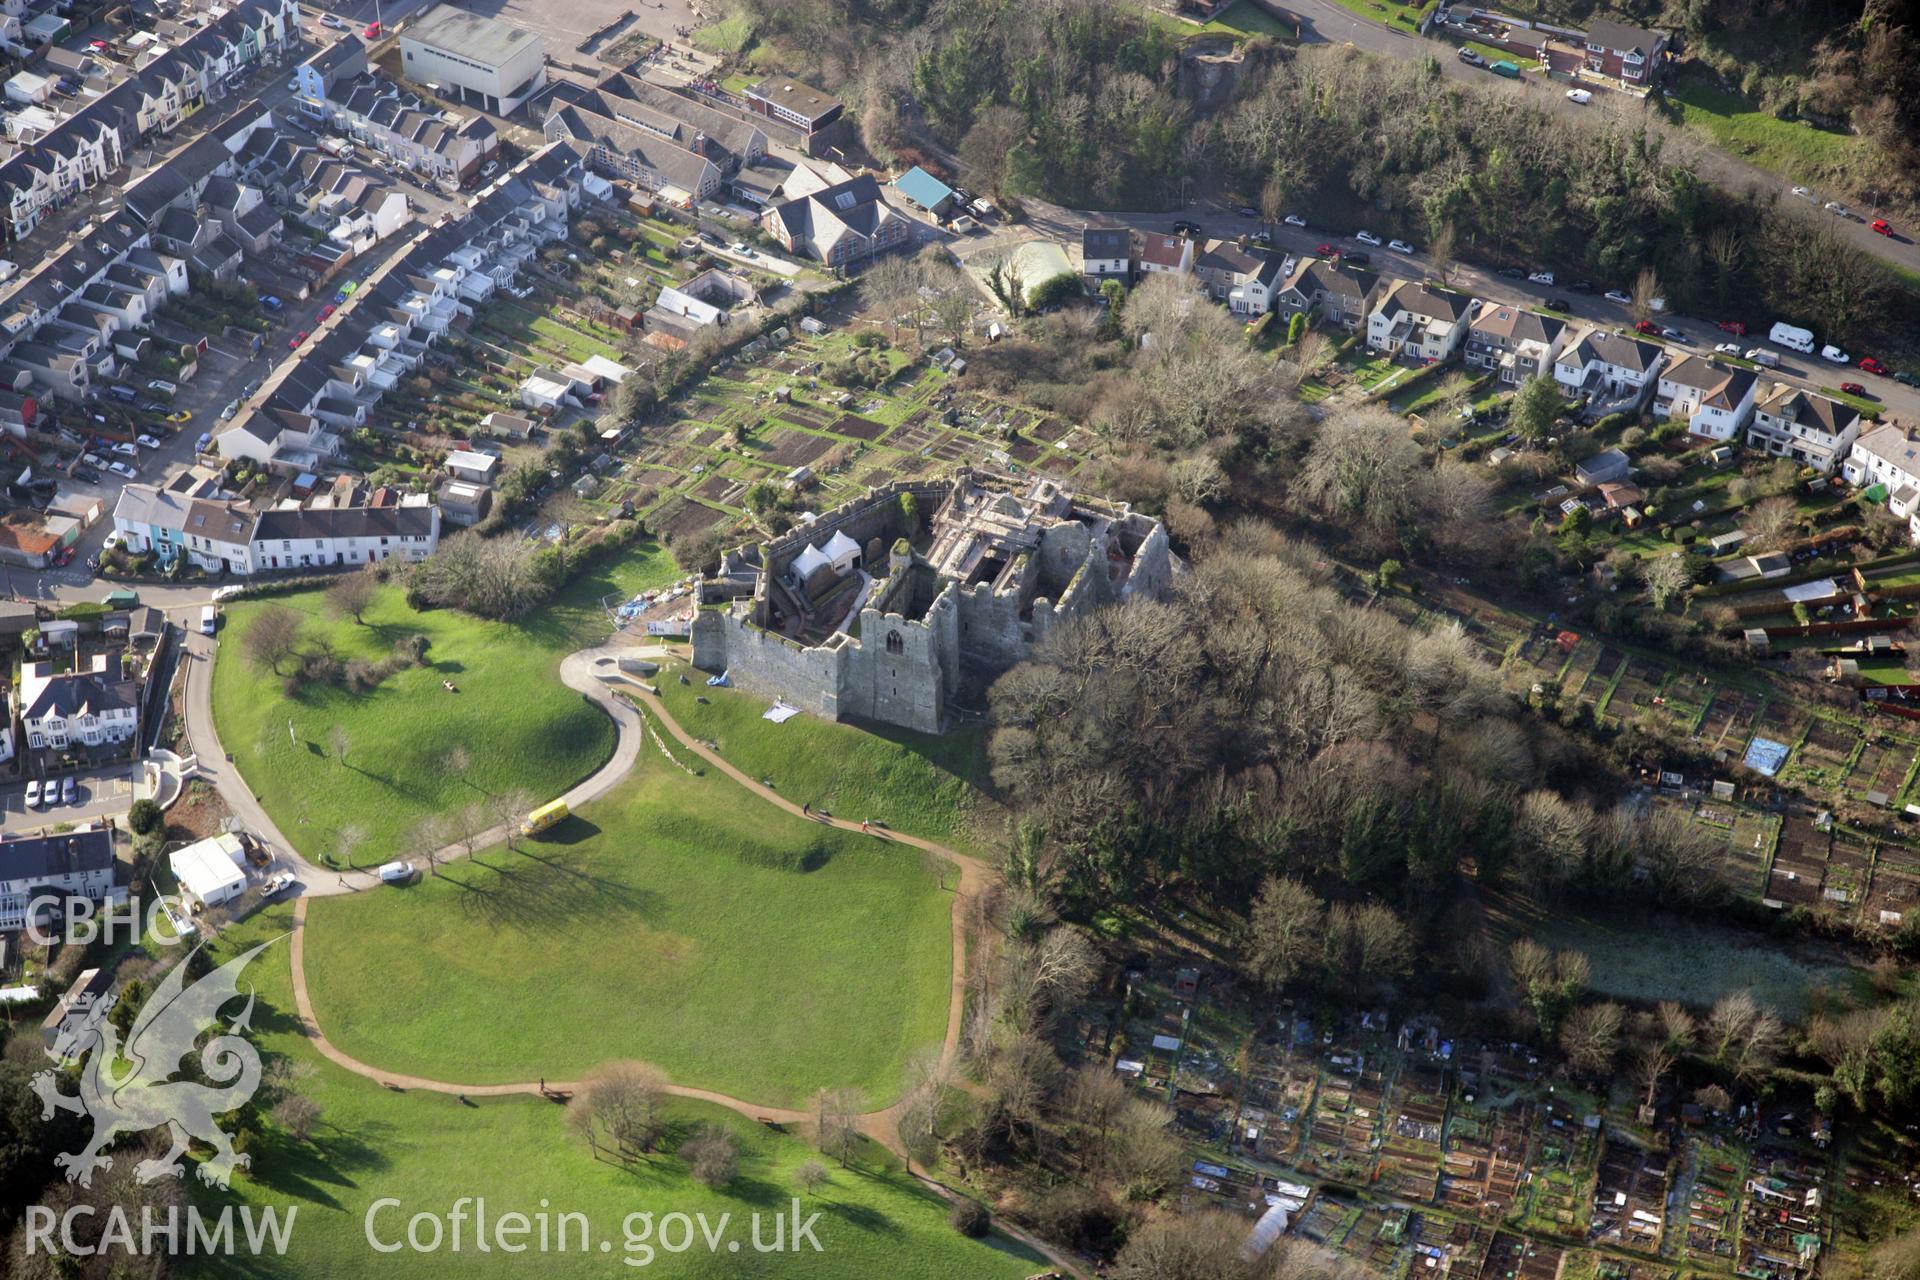 RCAHMW colour oblique photograph of Oystermouth Castle, during renovation work. Taken by Toby Driver on 02/02/2012.